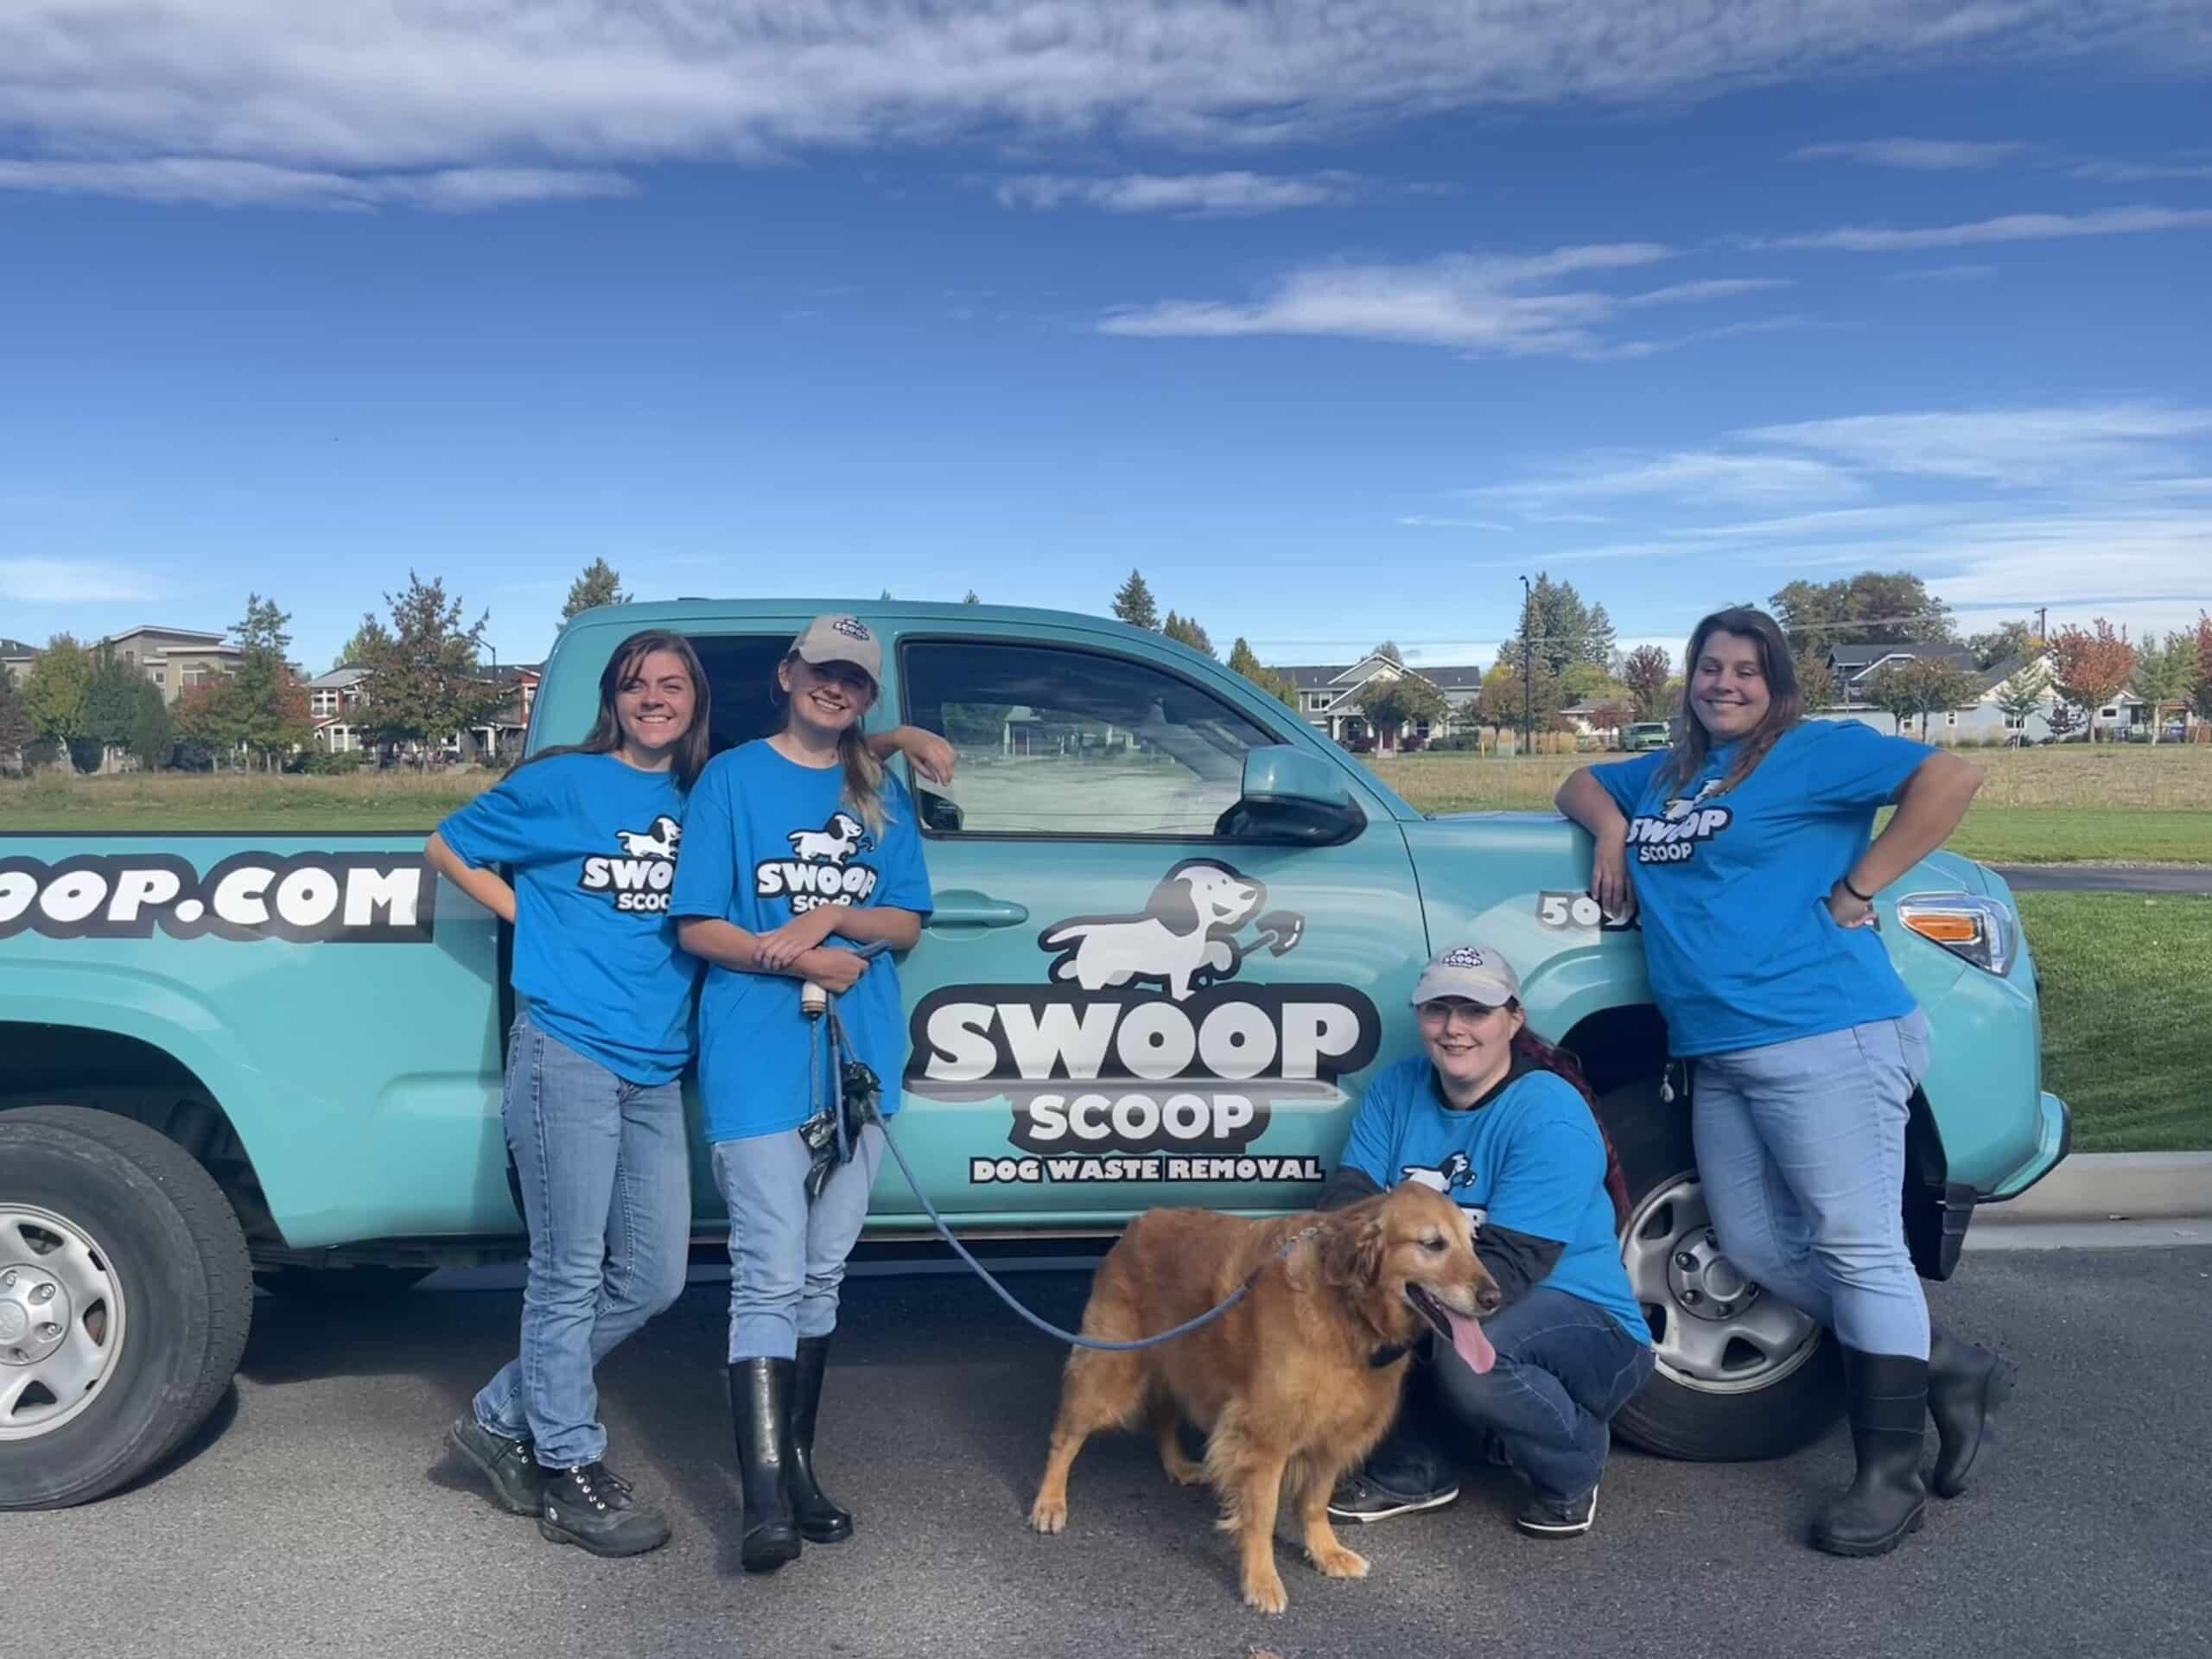 Dog waste removal team in Spokane, WA standing in front of a Swoop Scoop Truck.